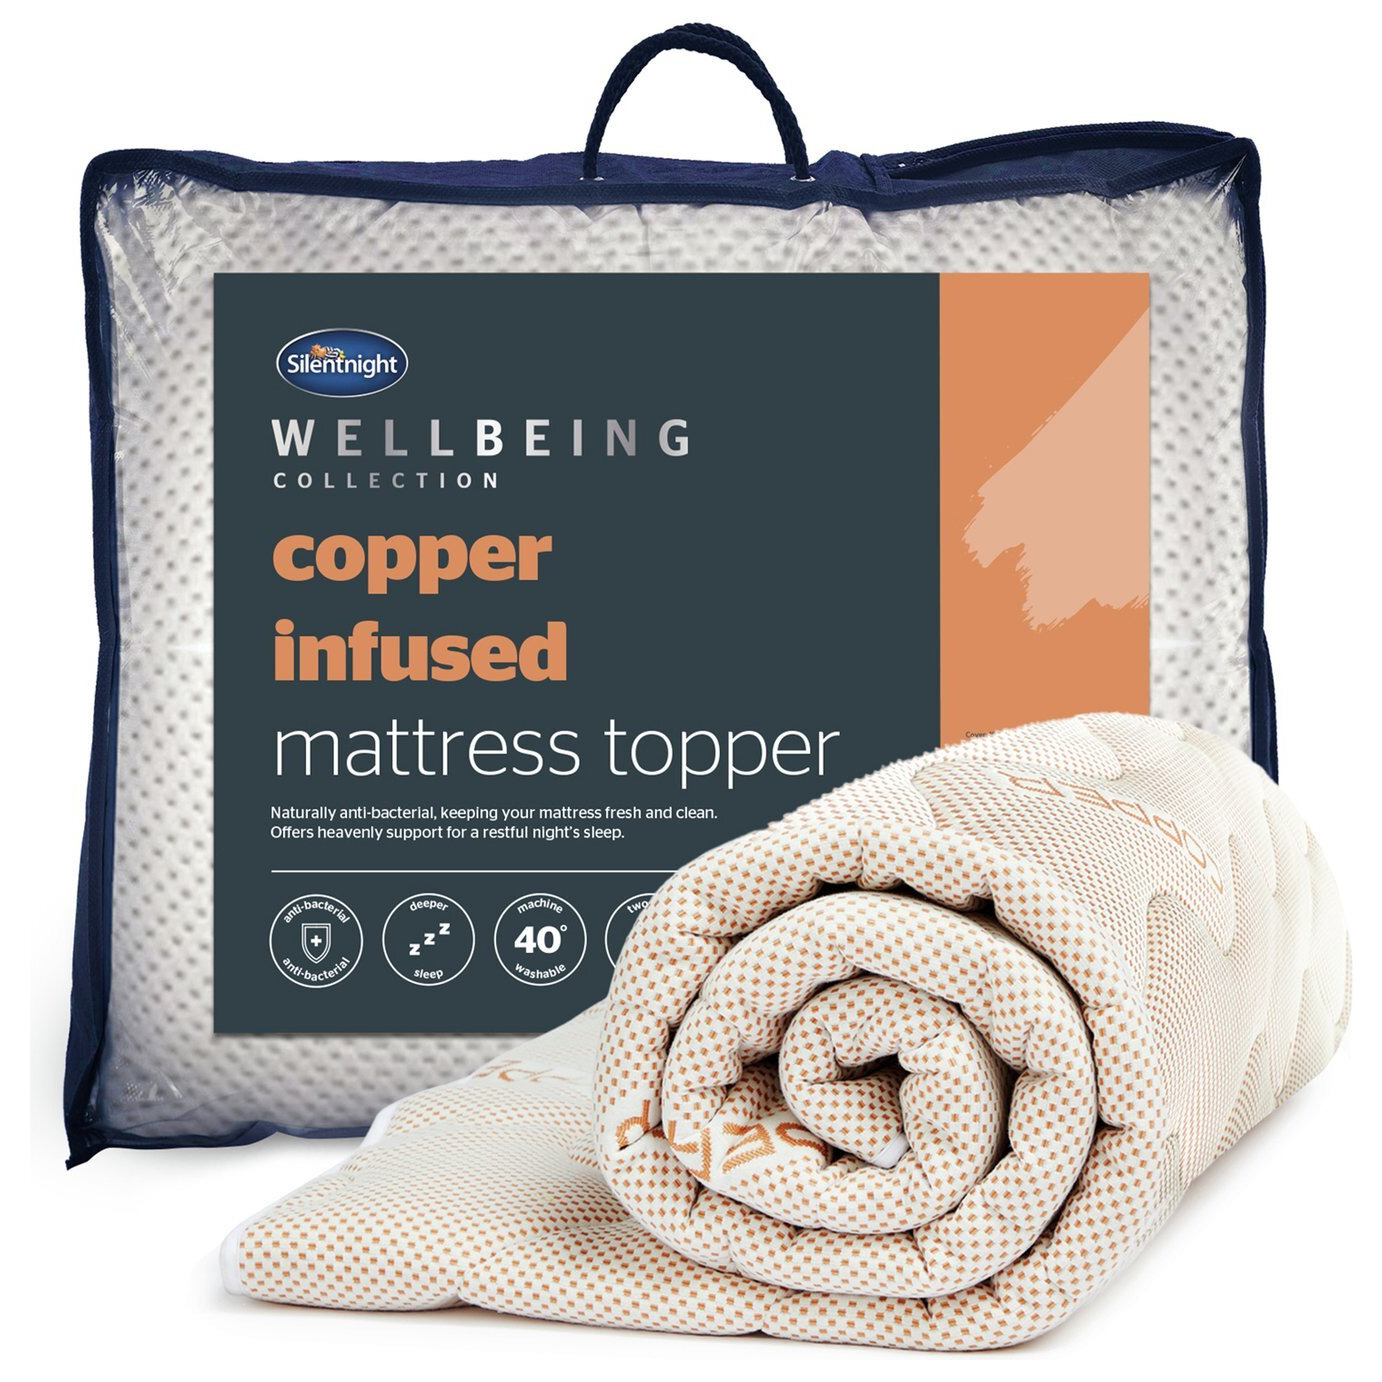 Silentnight Wellbeing Copper Infused Mattress Topper - King - image 1